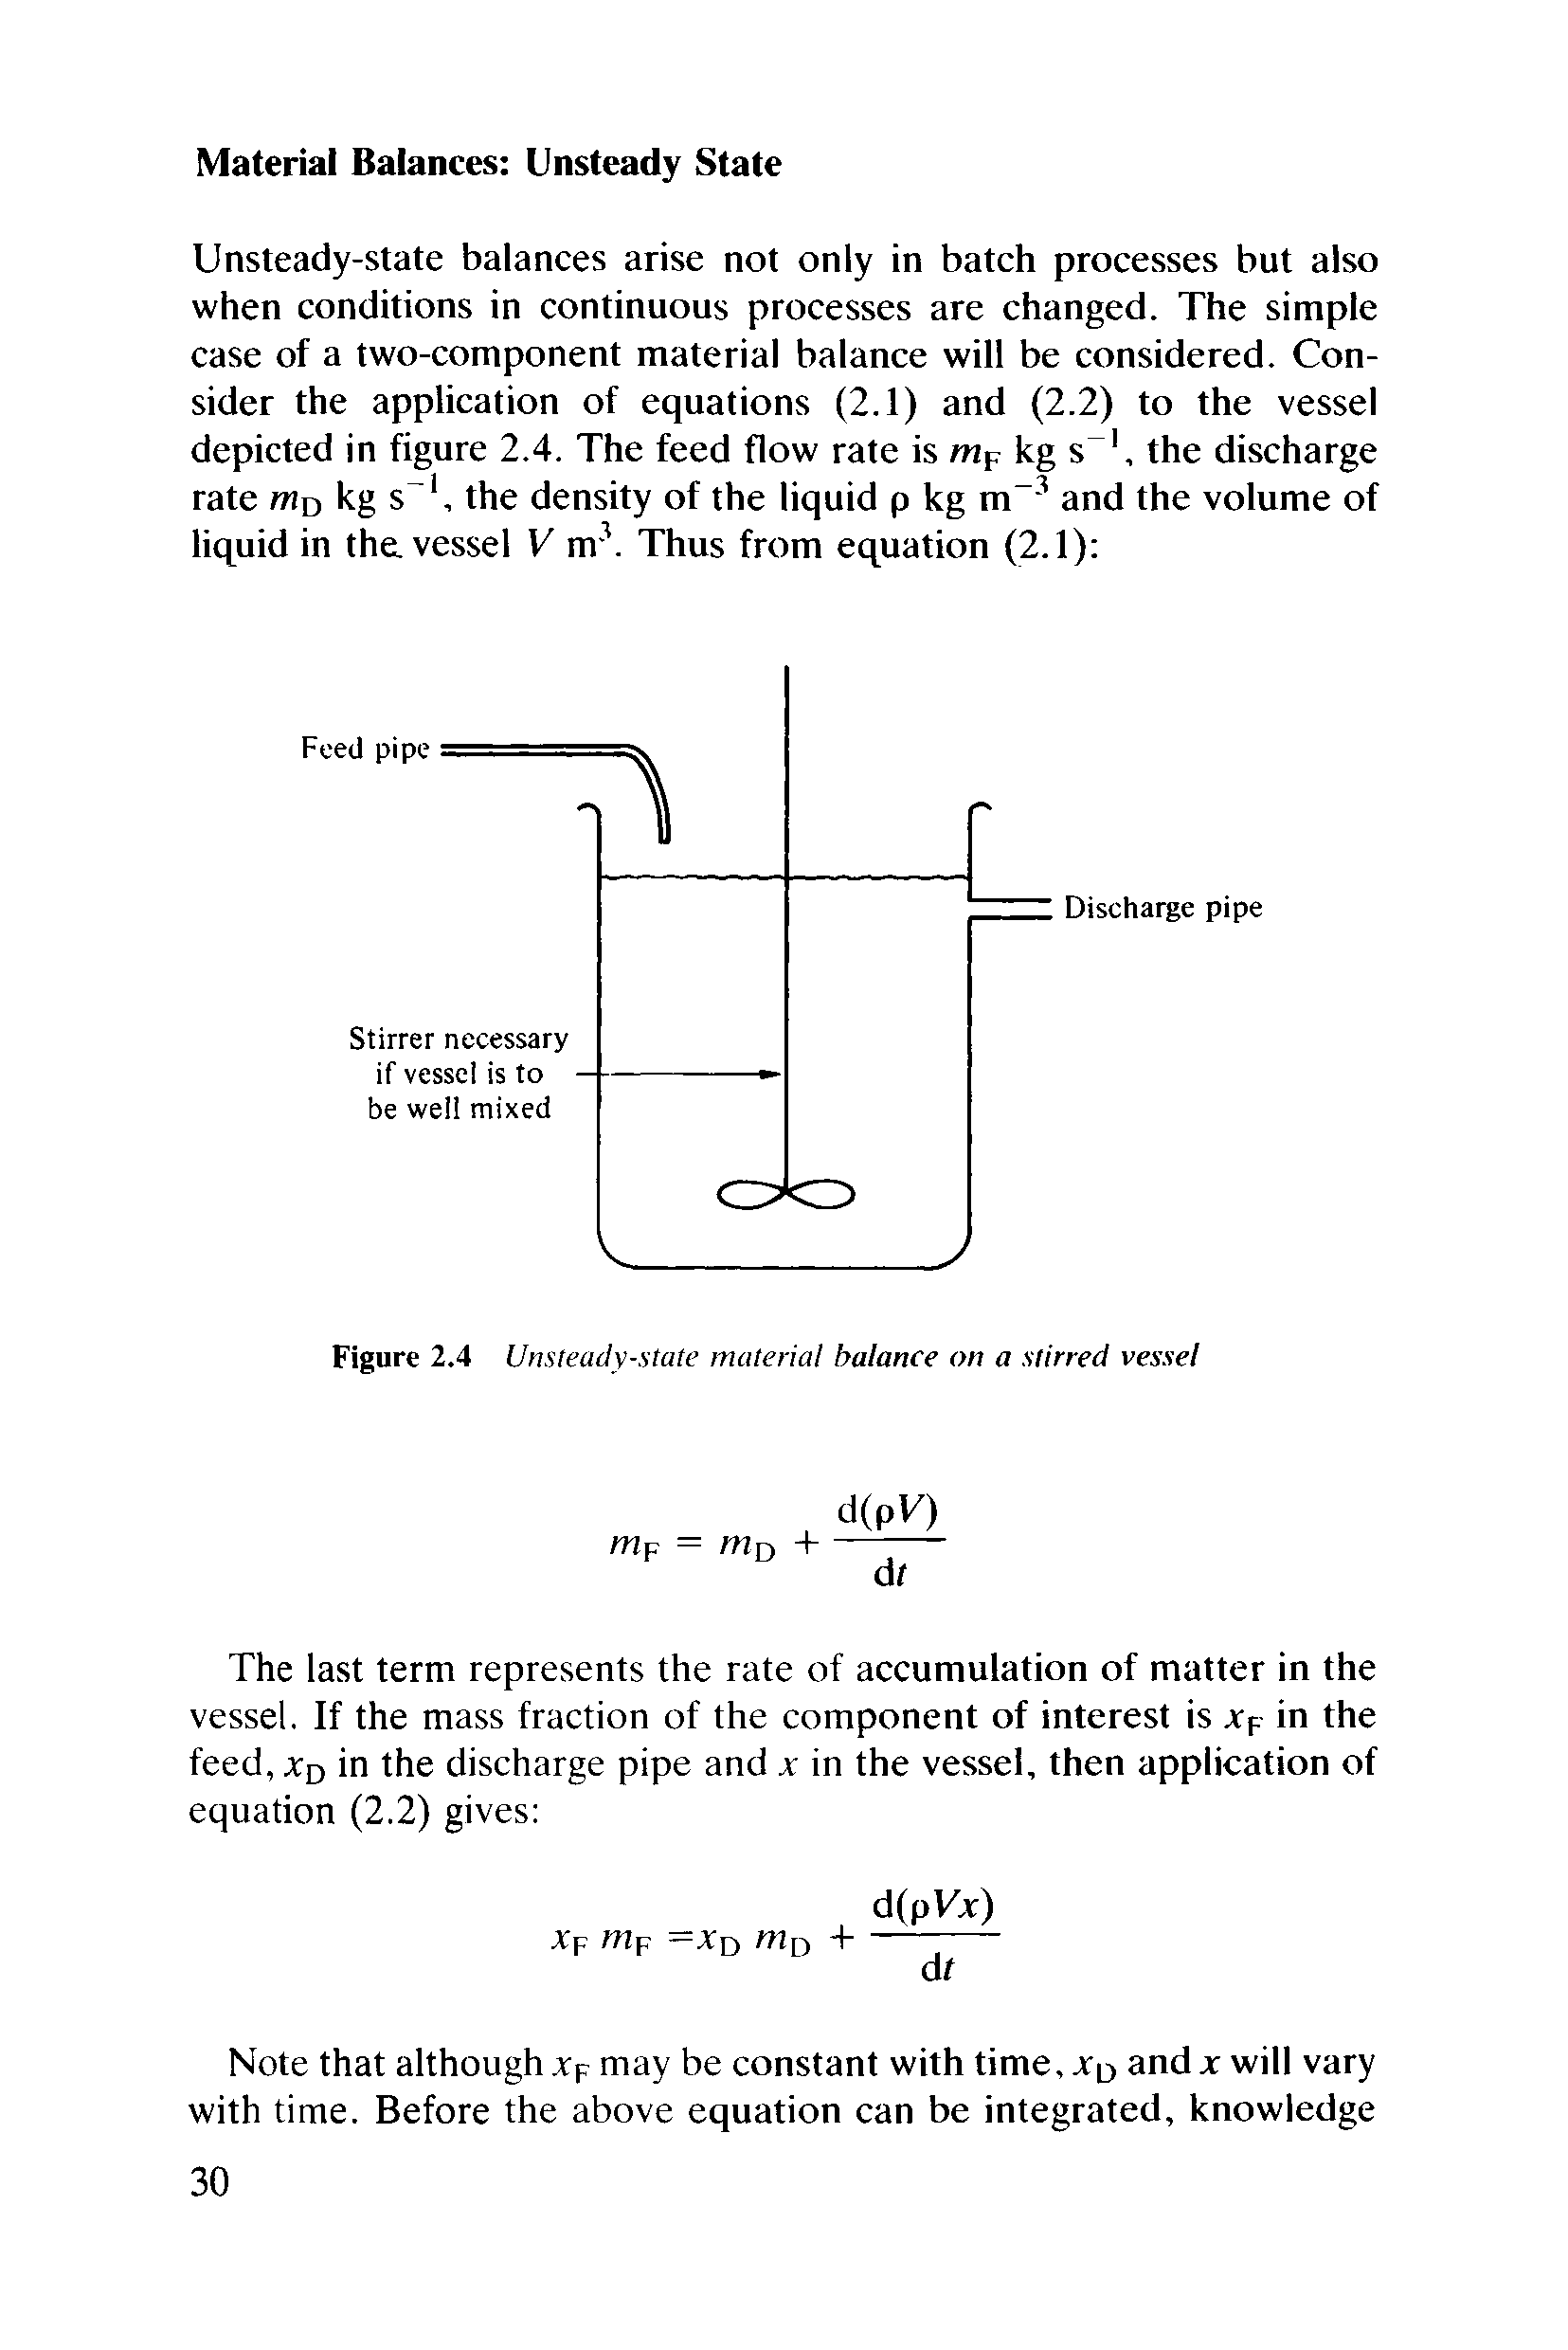 Figure 2.4 Unsteady-state material balance on a stirred vessel...